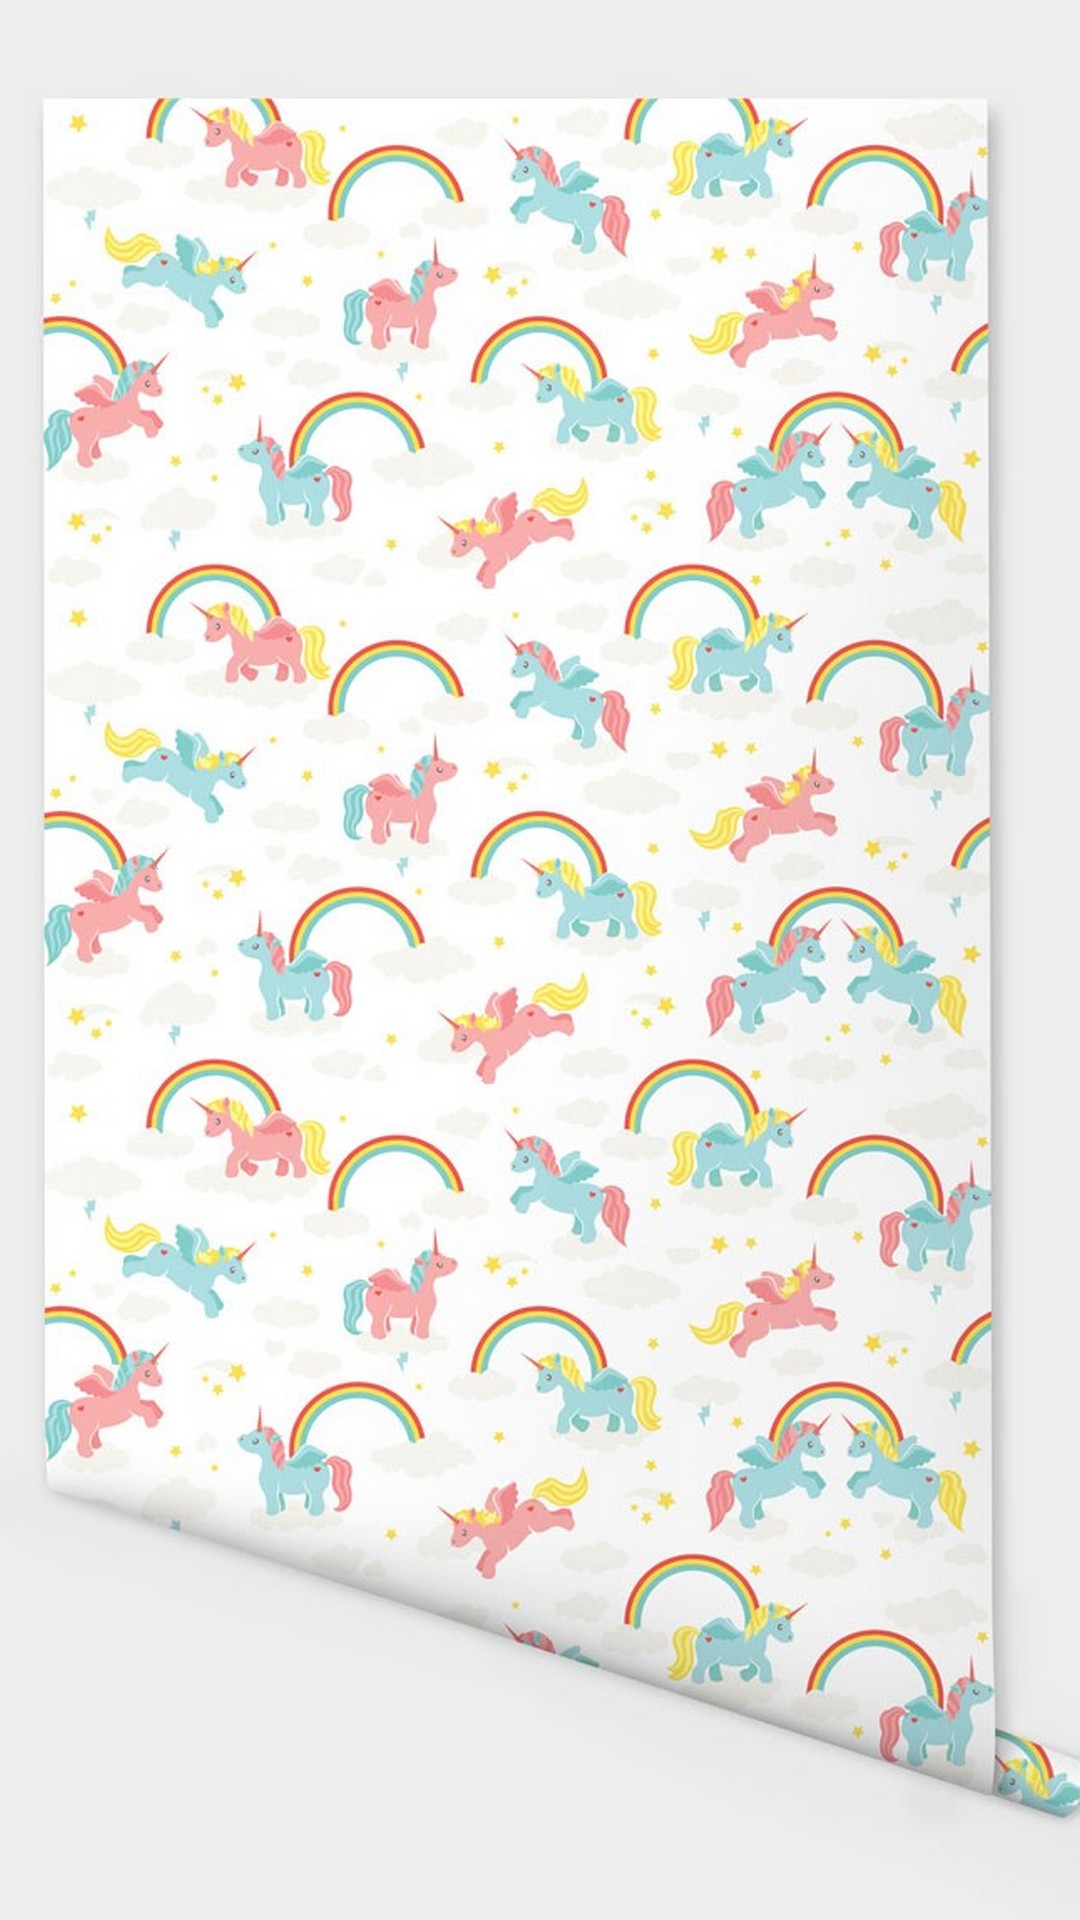 Cute Girly Unicorn iPhone 8 Wallpaper with high-resolution 1080x1920 pixel. You can use this wallpaper for your iPhone 5, 6, 7, 8, X, XS, XR backgrounds, Mobile Screensaver, or iPad Lock Screen